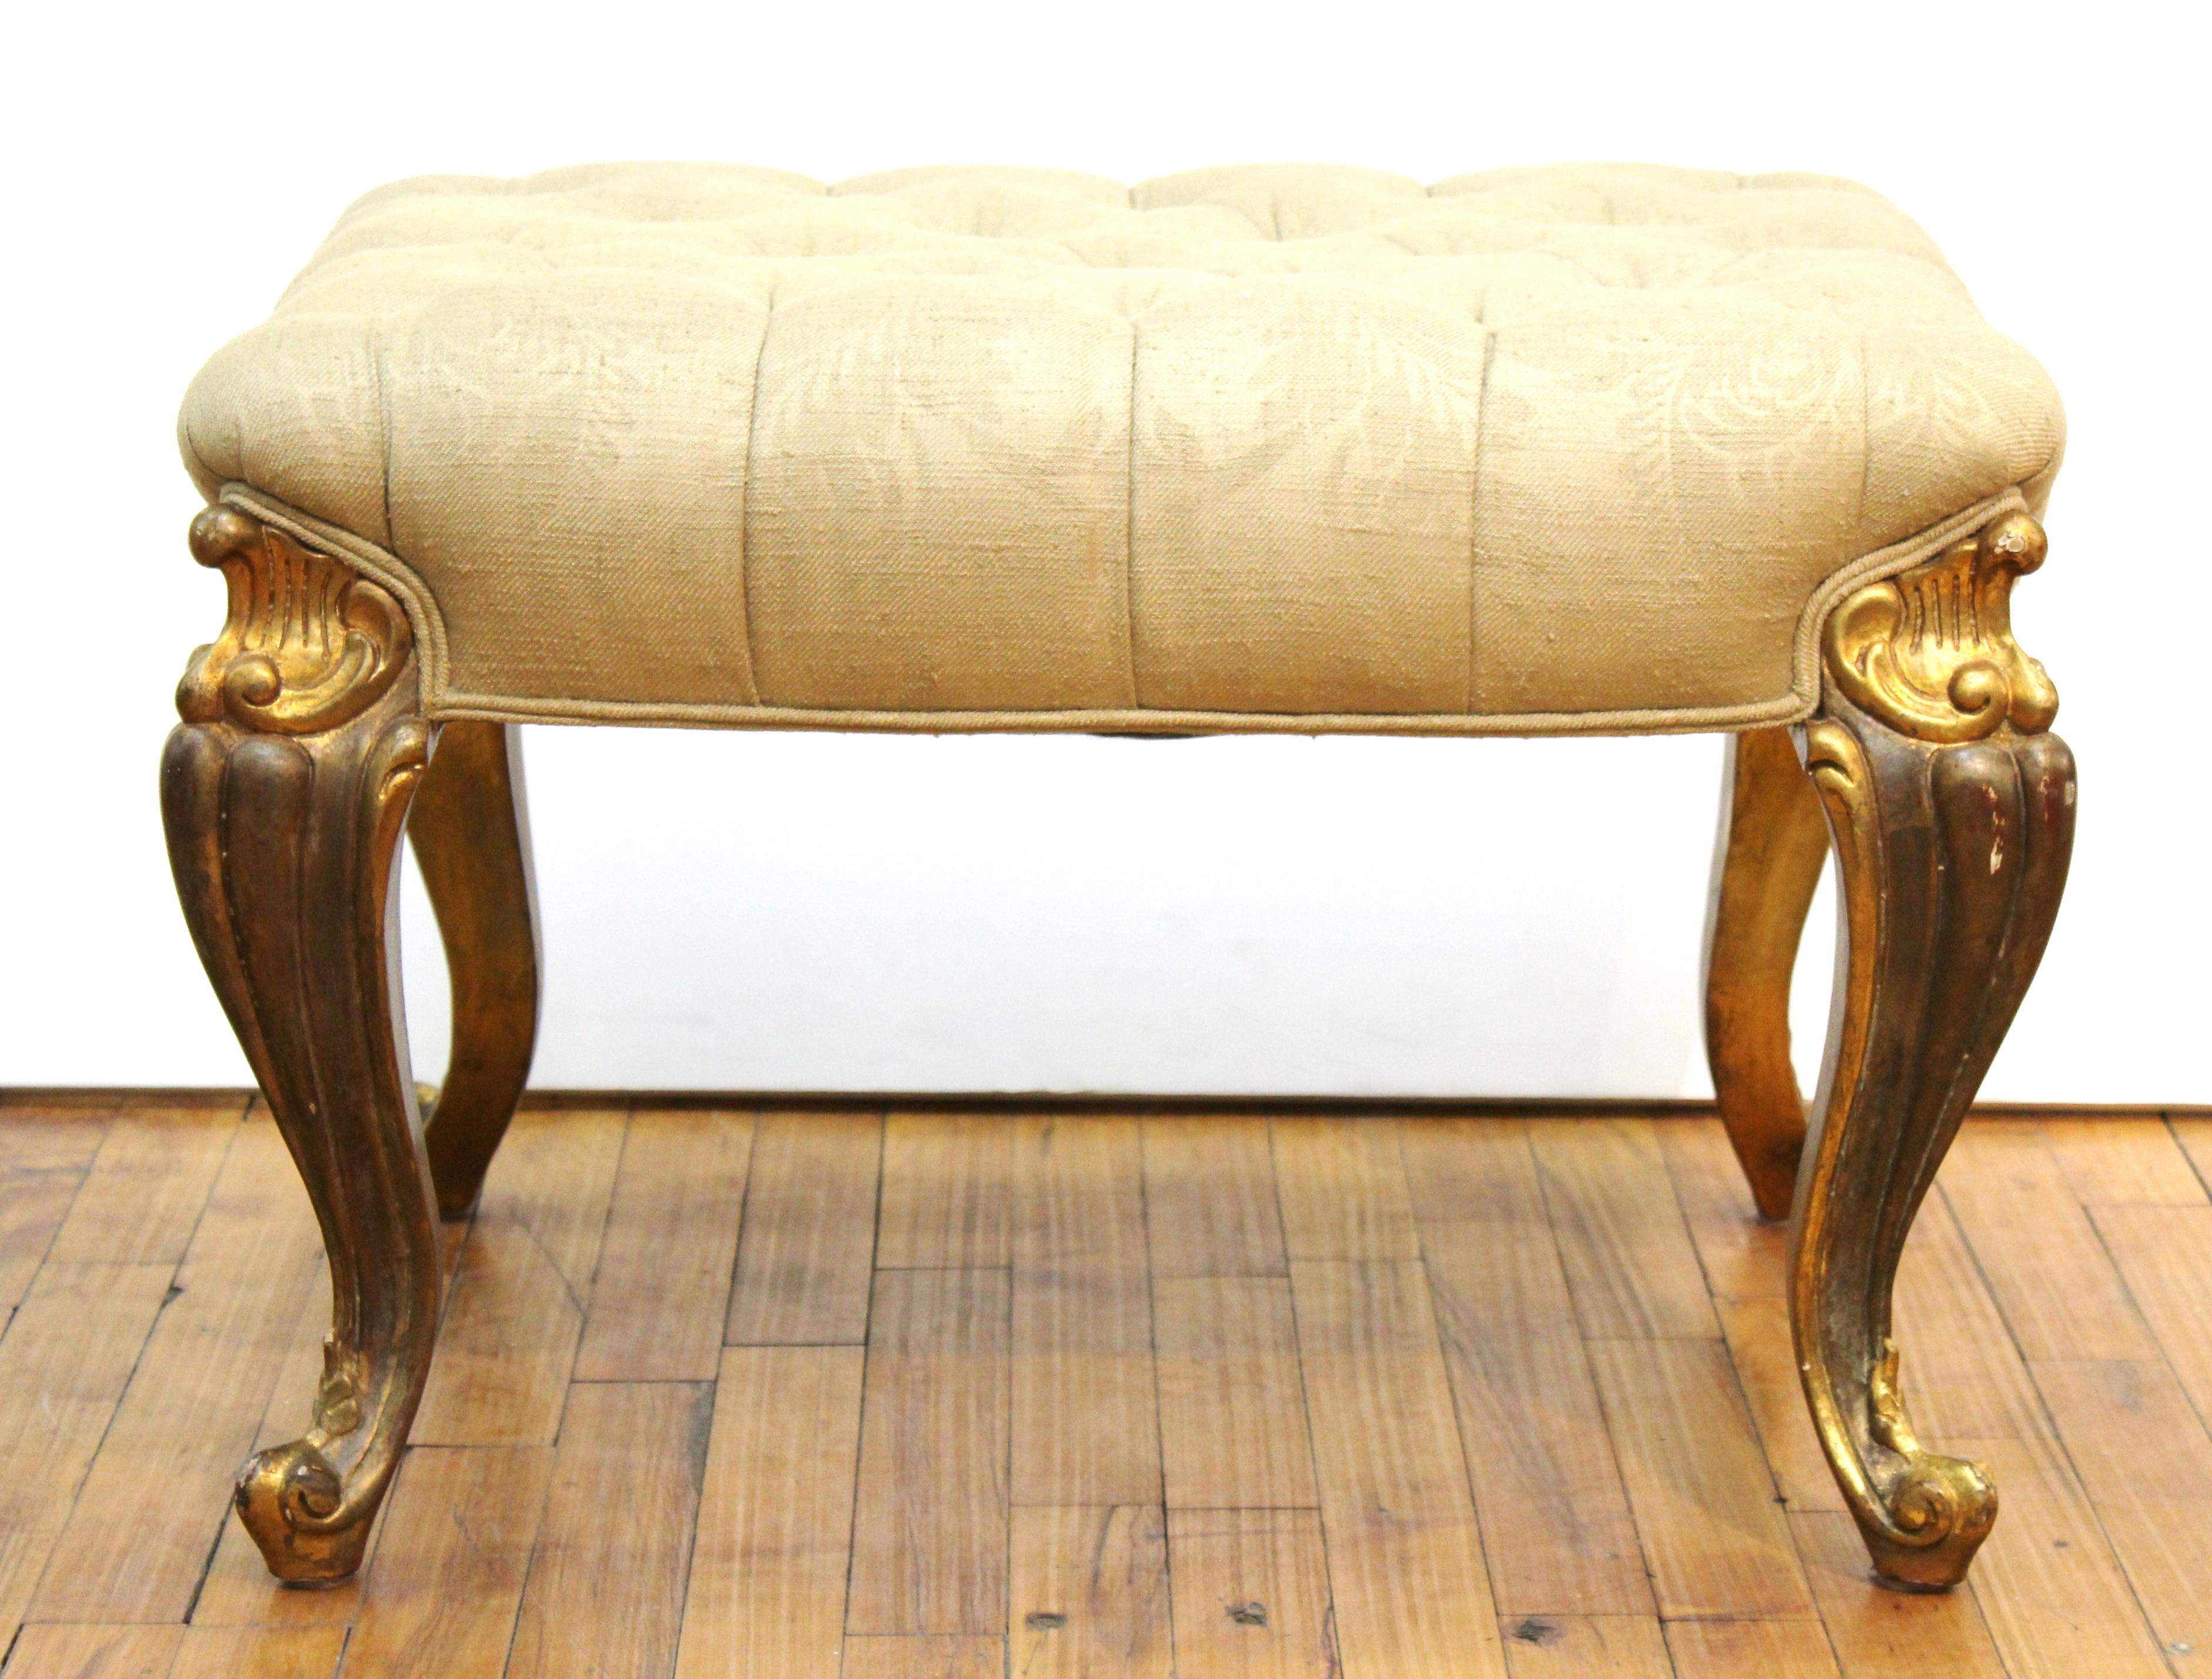 Baroque Revival style upholstered ottoman with carved and giltwood legs. In great vintage condition with age-appropriate wear and use.